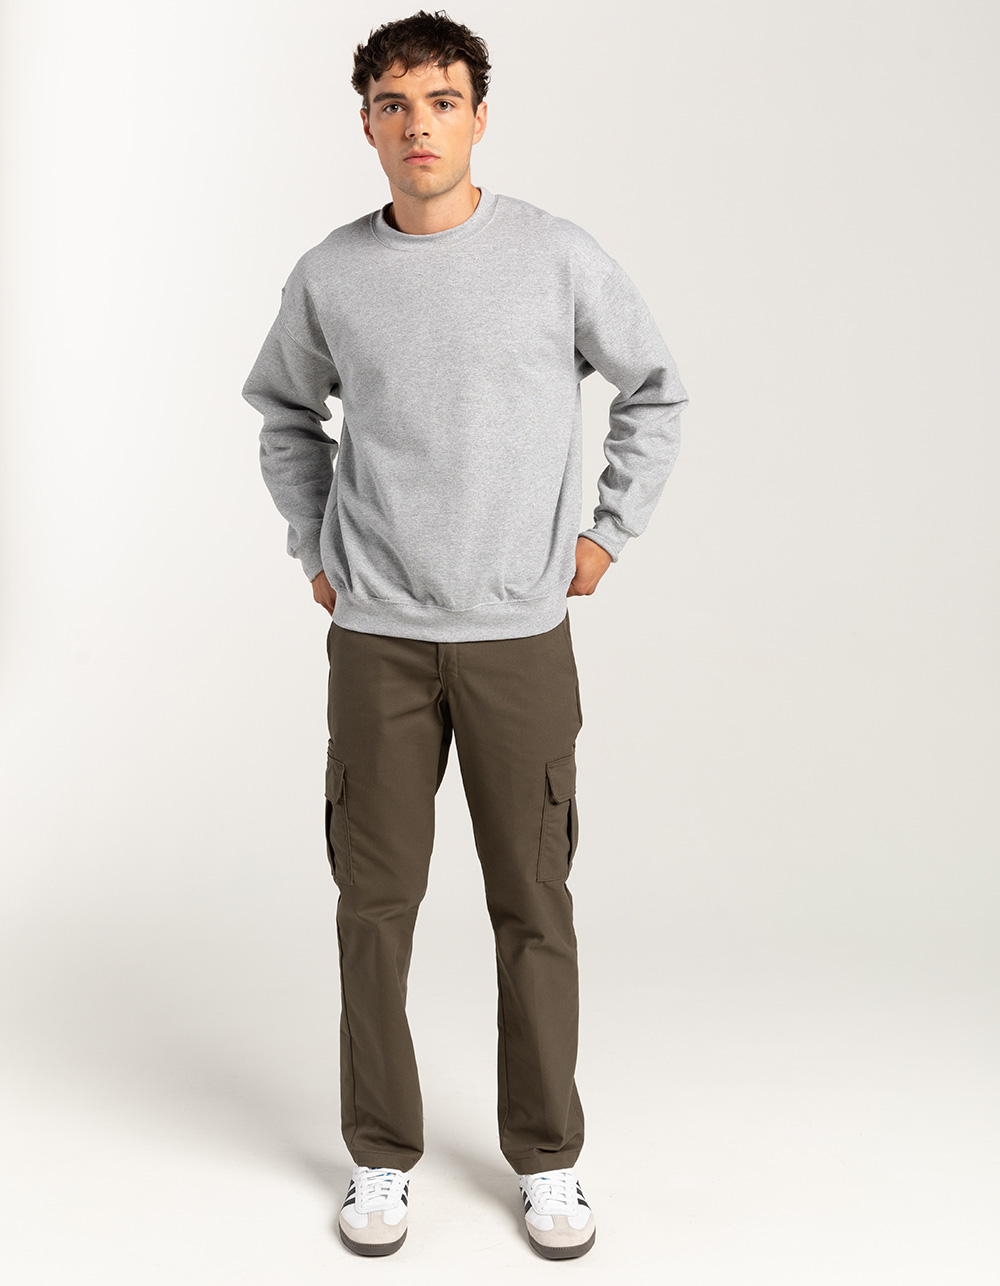 HoIIows  Cool outfits for men, Drip outfit men, Dickies outfit